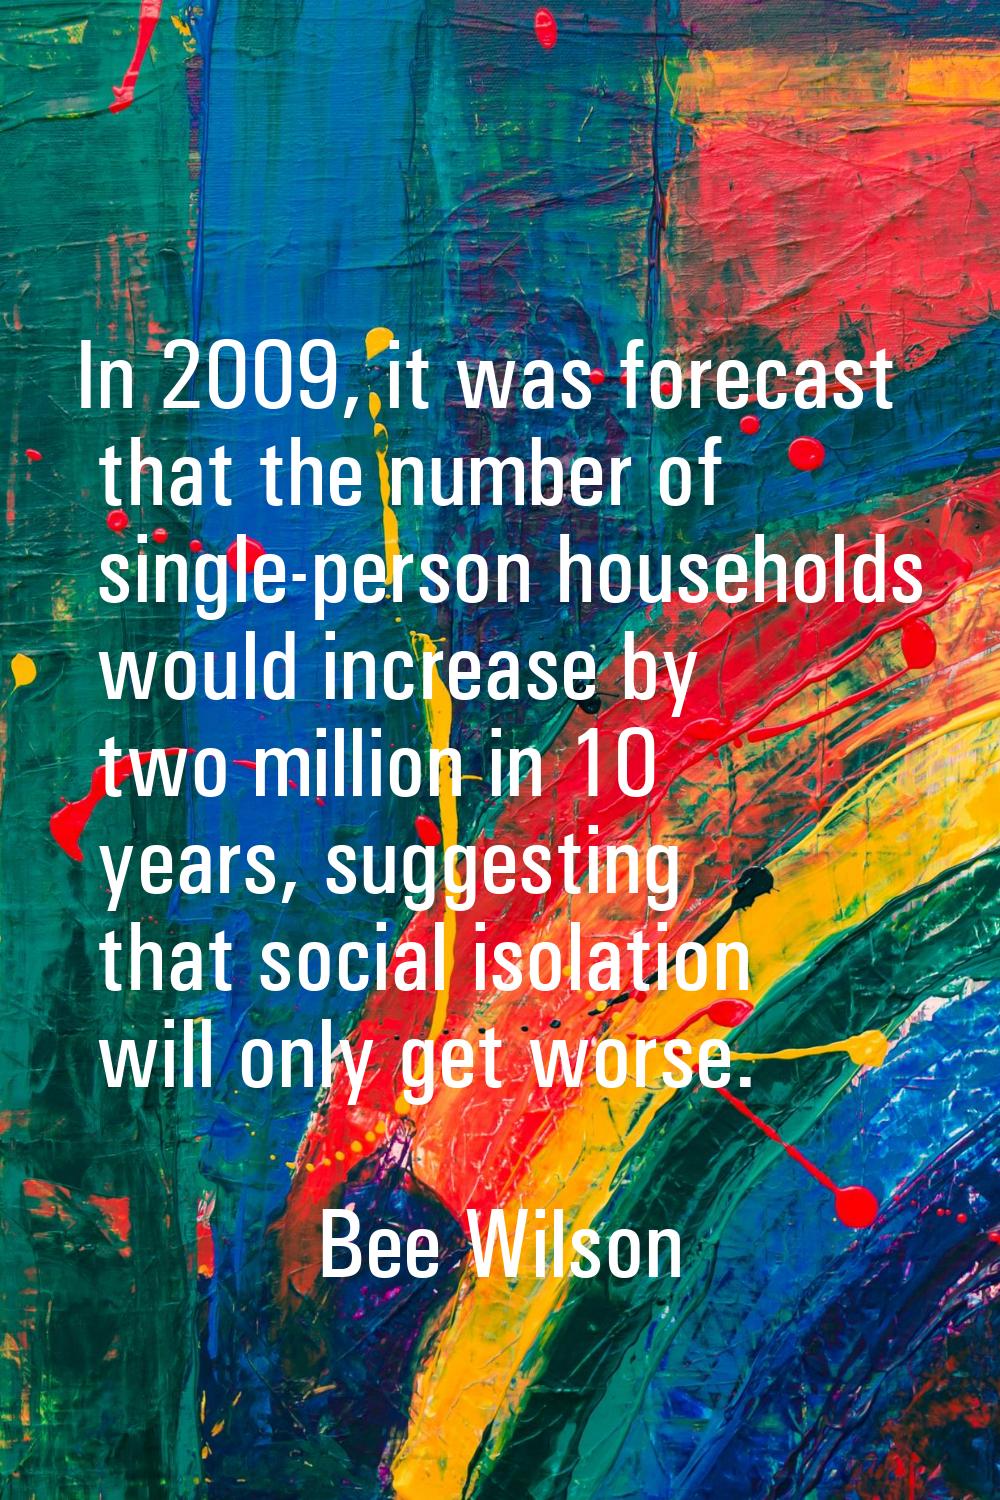 In 2009, it was forecast that the number of single-person households would increase by two million 